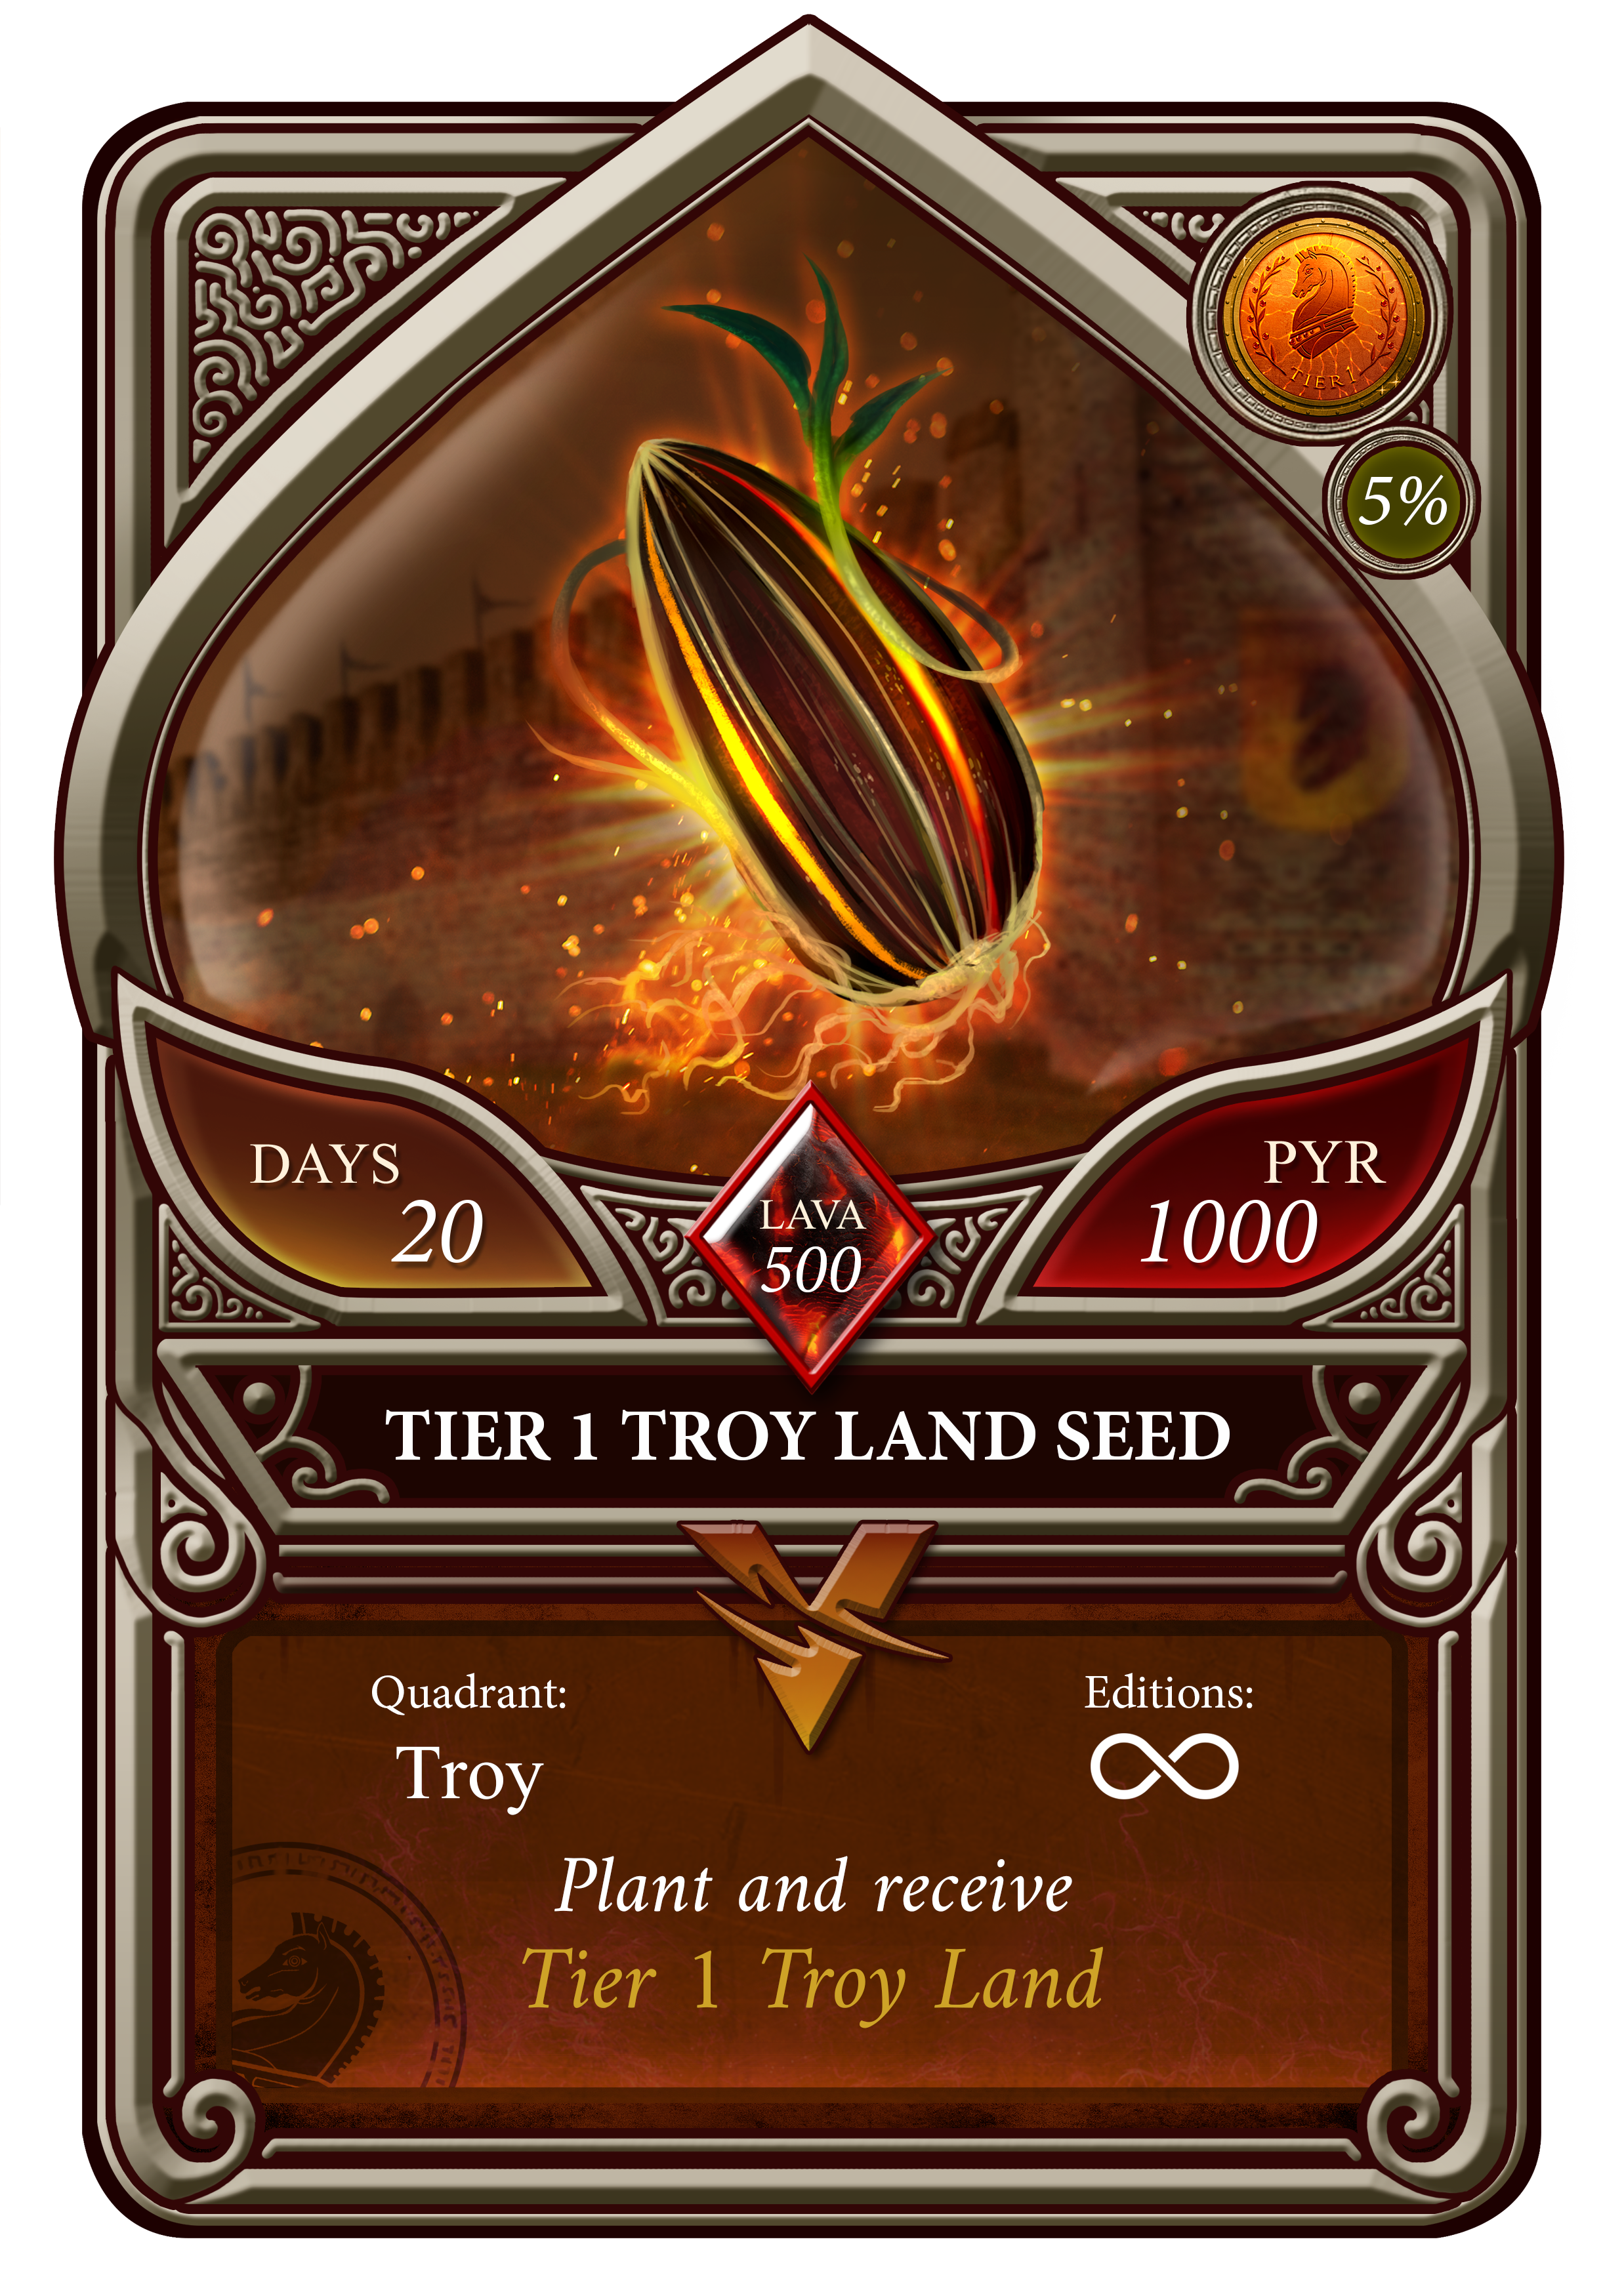 Tier 1 Troy Land Seed